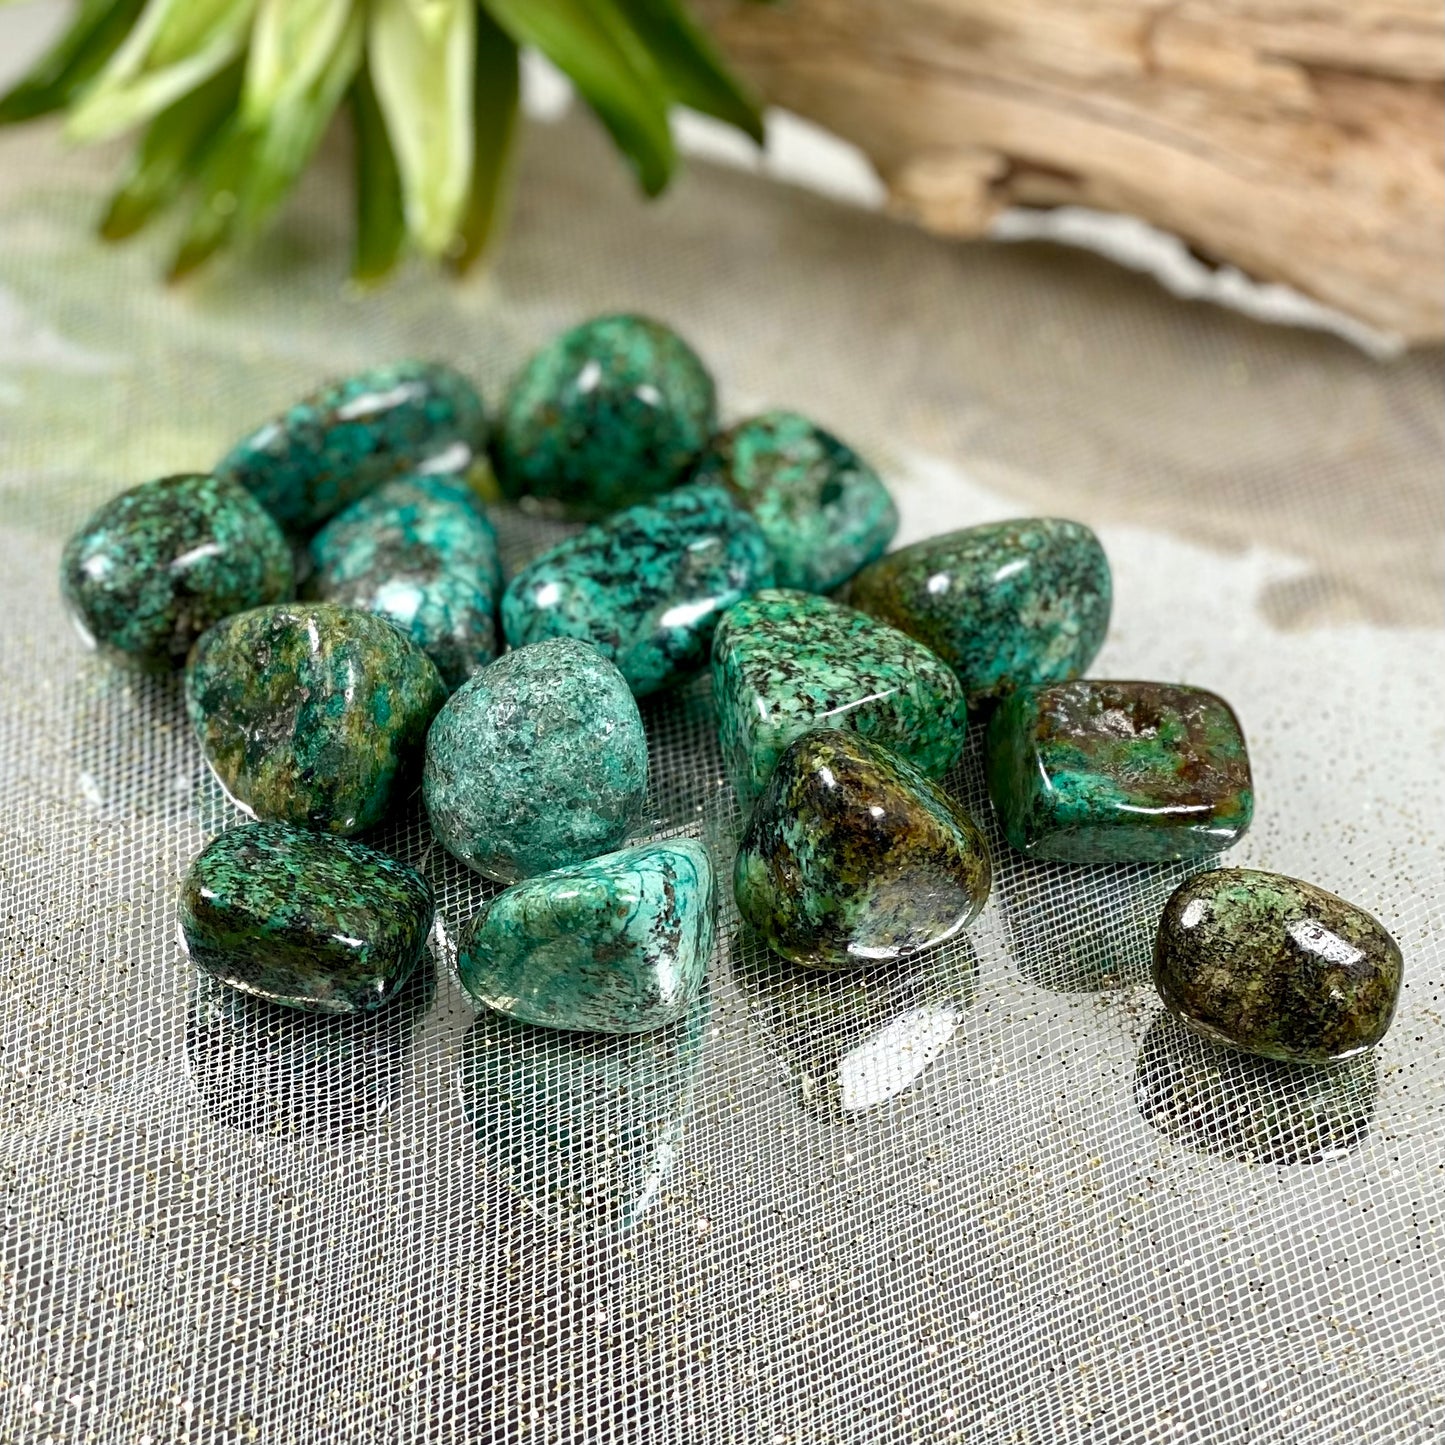 Exquisite African Turquoise Tumbled Stone for Transformation!